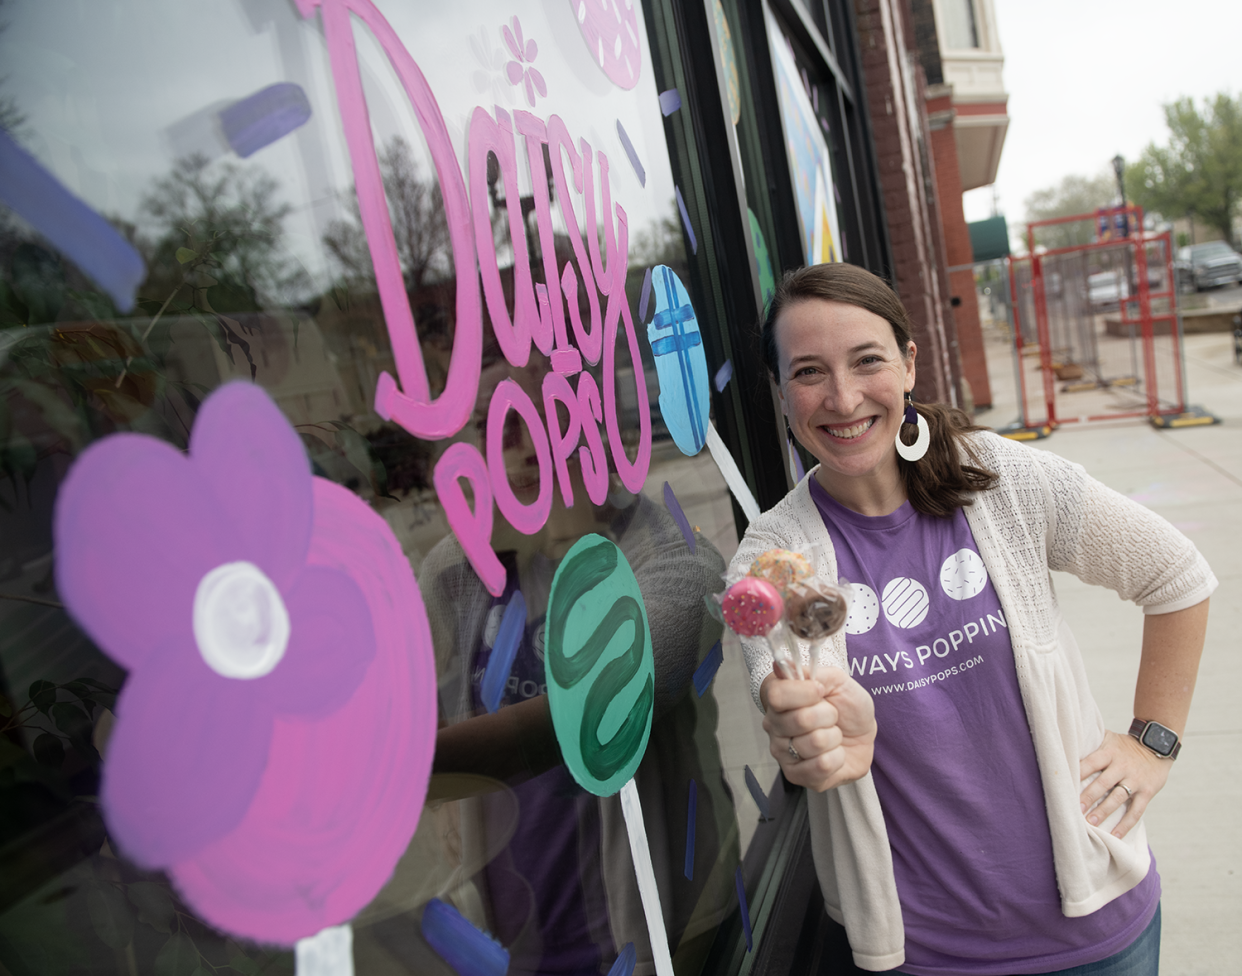 Daisy Pops owner Amy Mucha has opened a store front in downtown Kent after running the cake pop business for five years out of her Kent home.